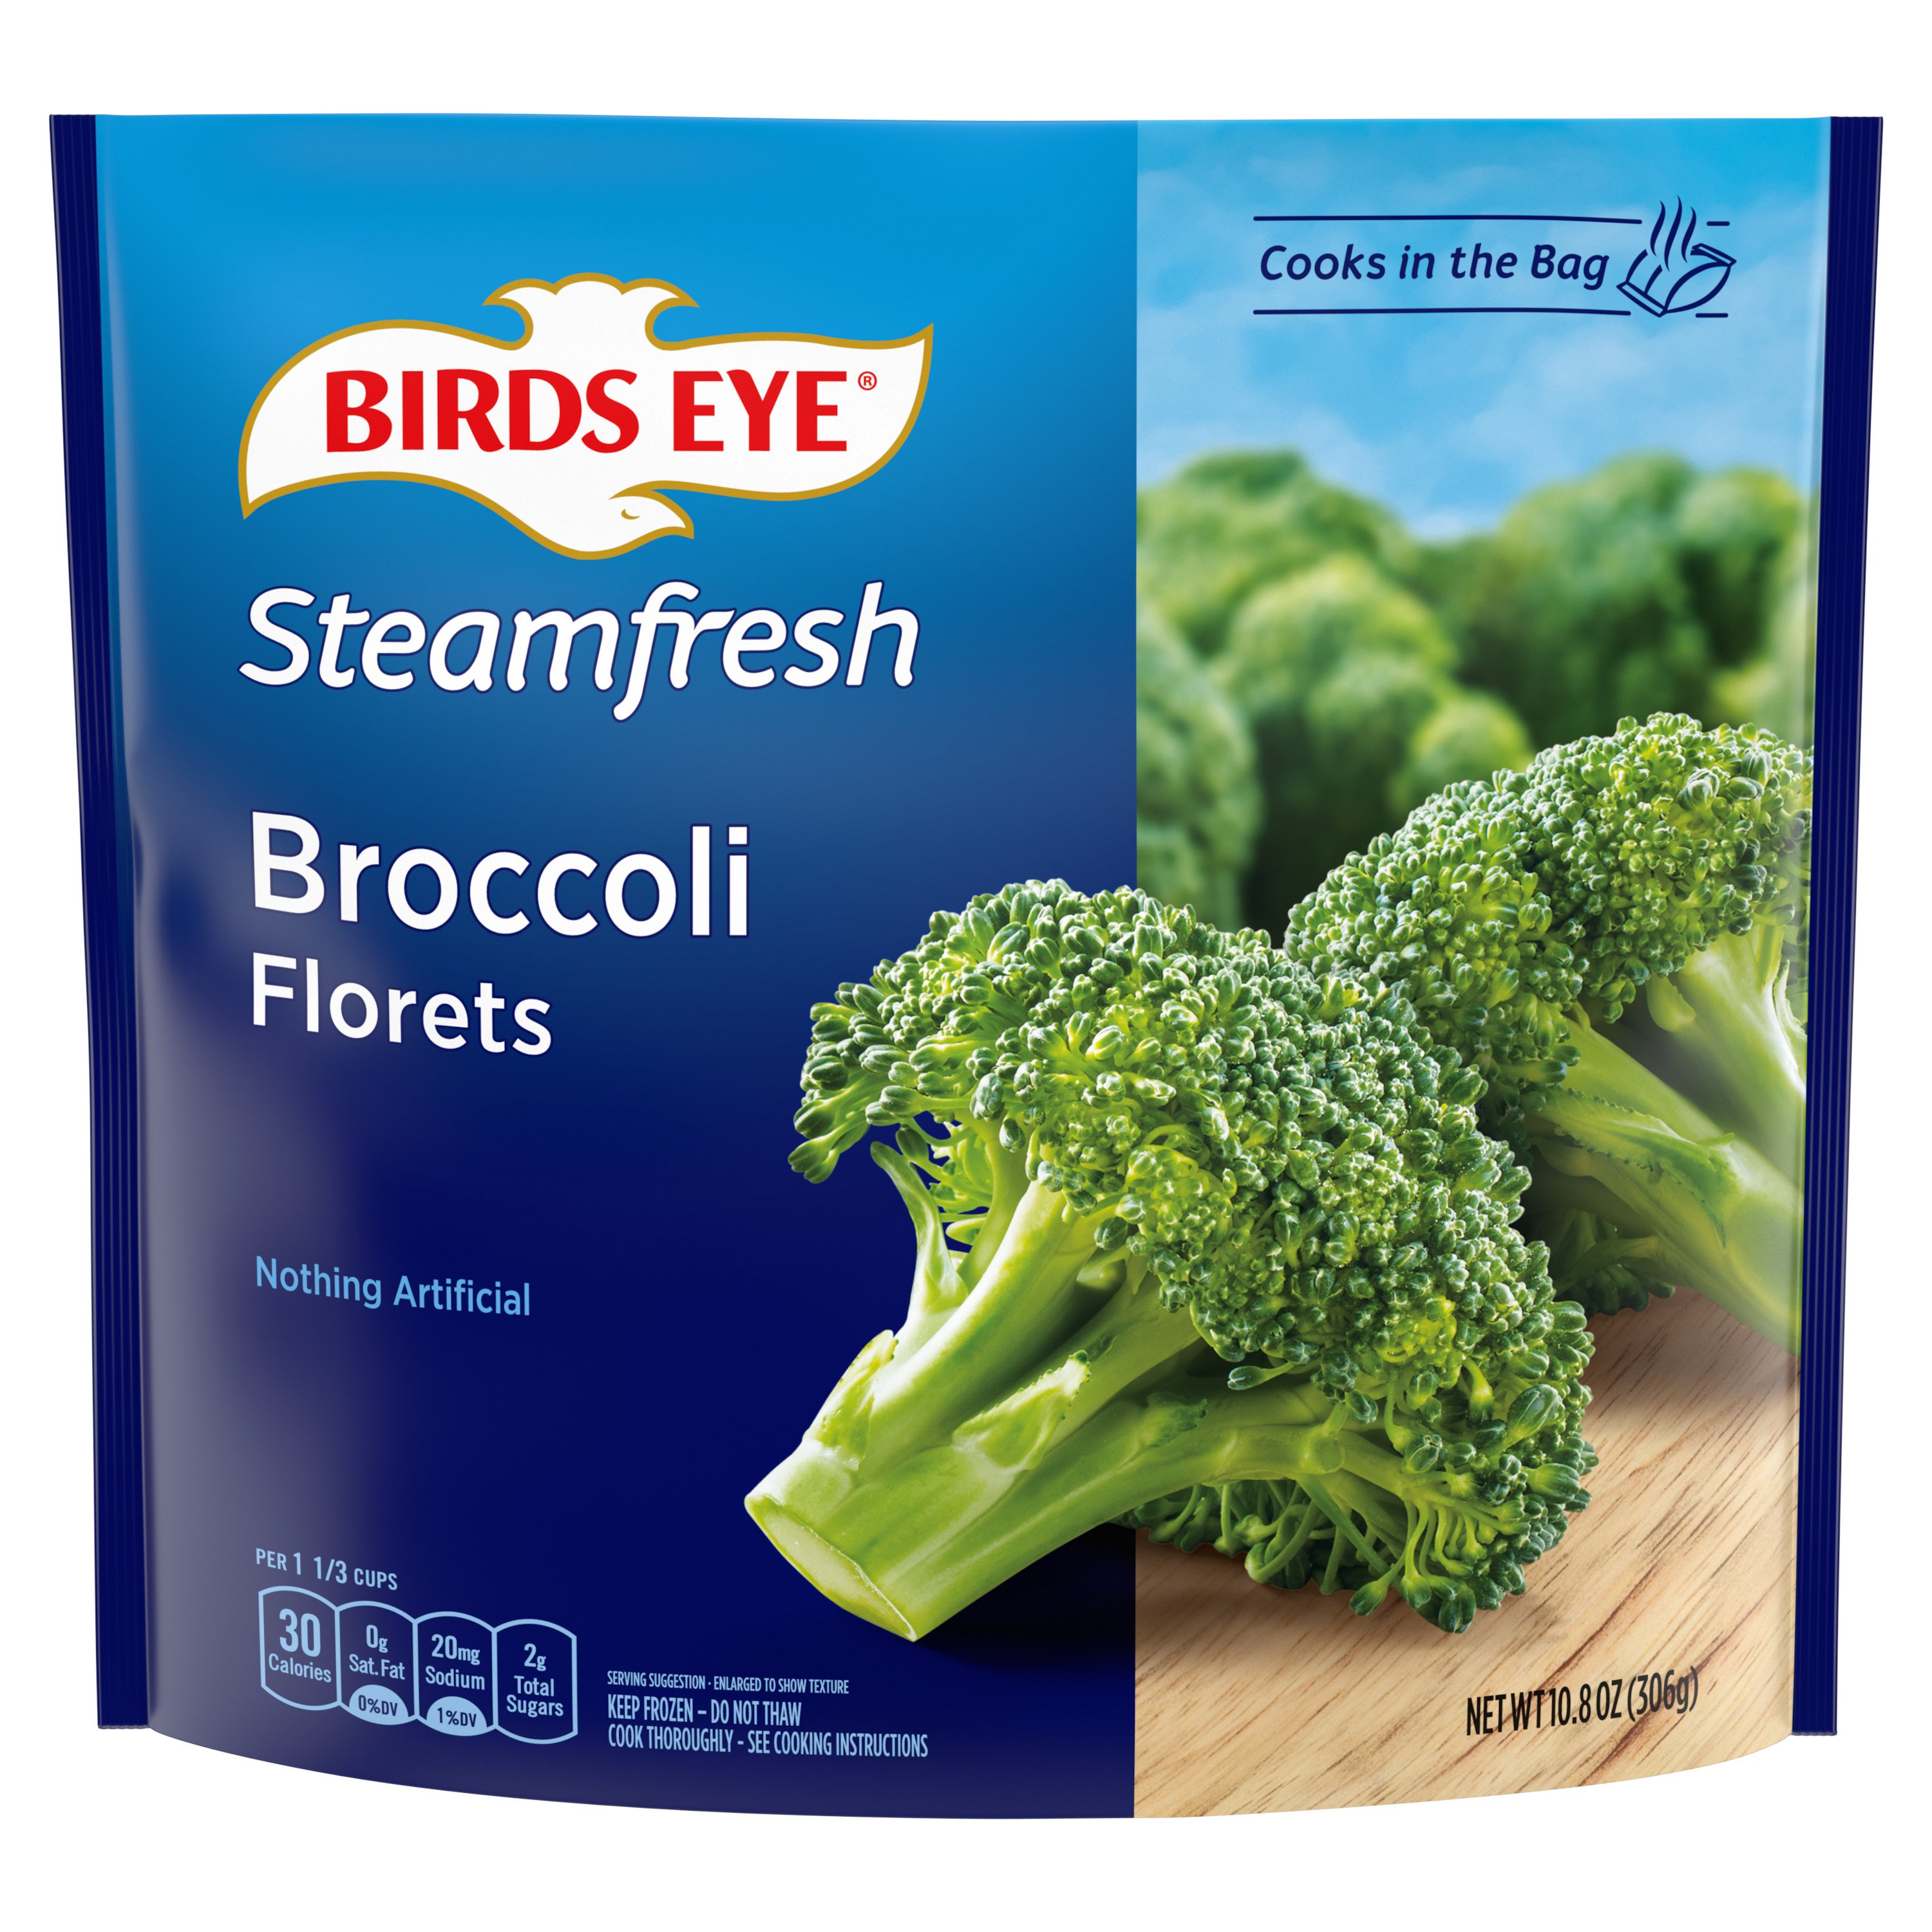 Steaming Fresh or Frozen Broccoli in the Microwave